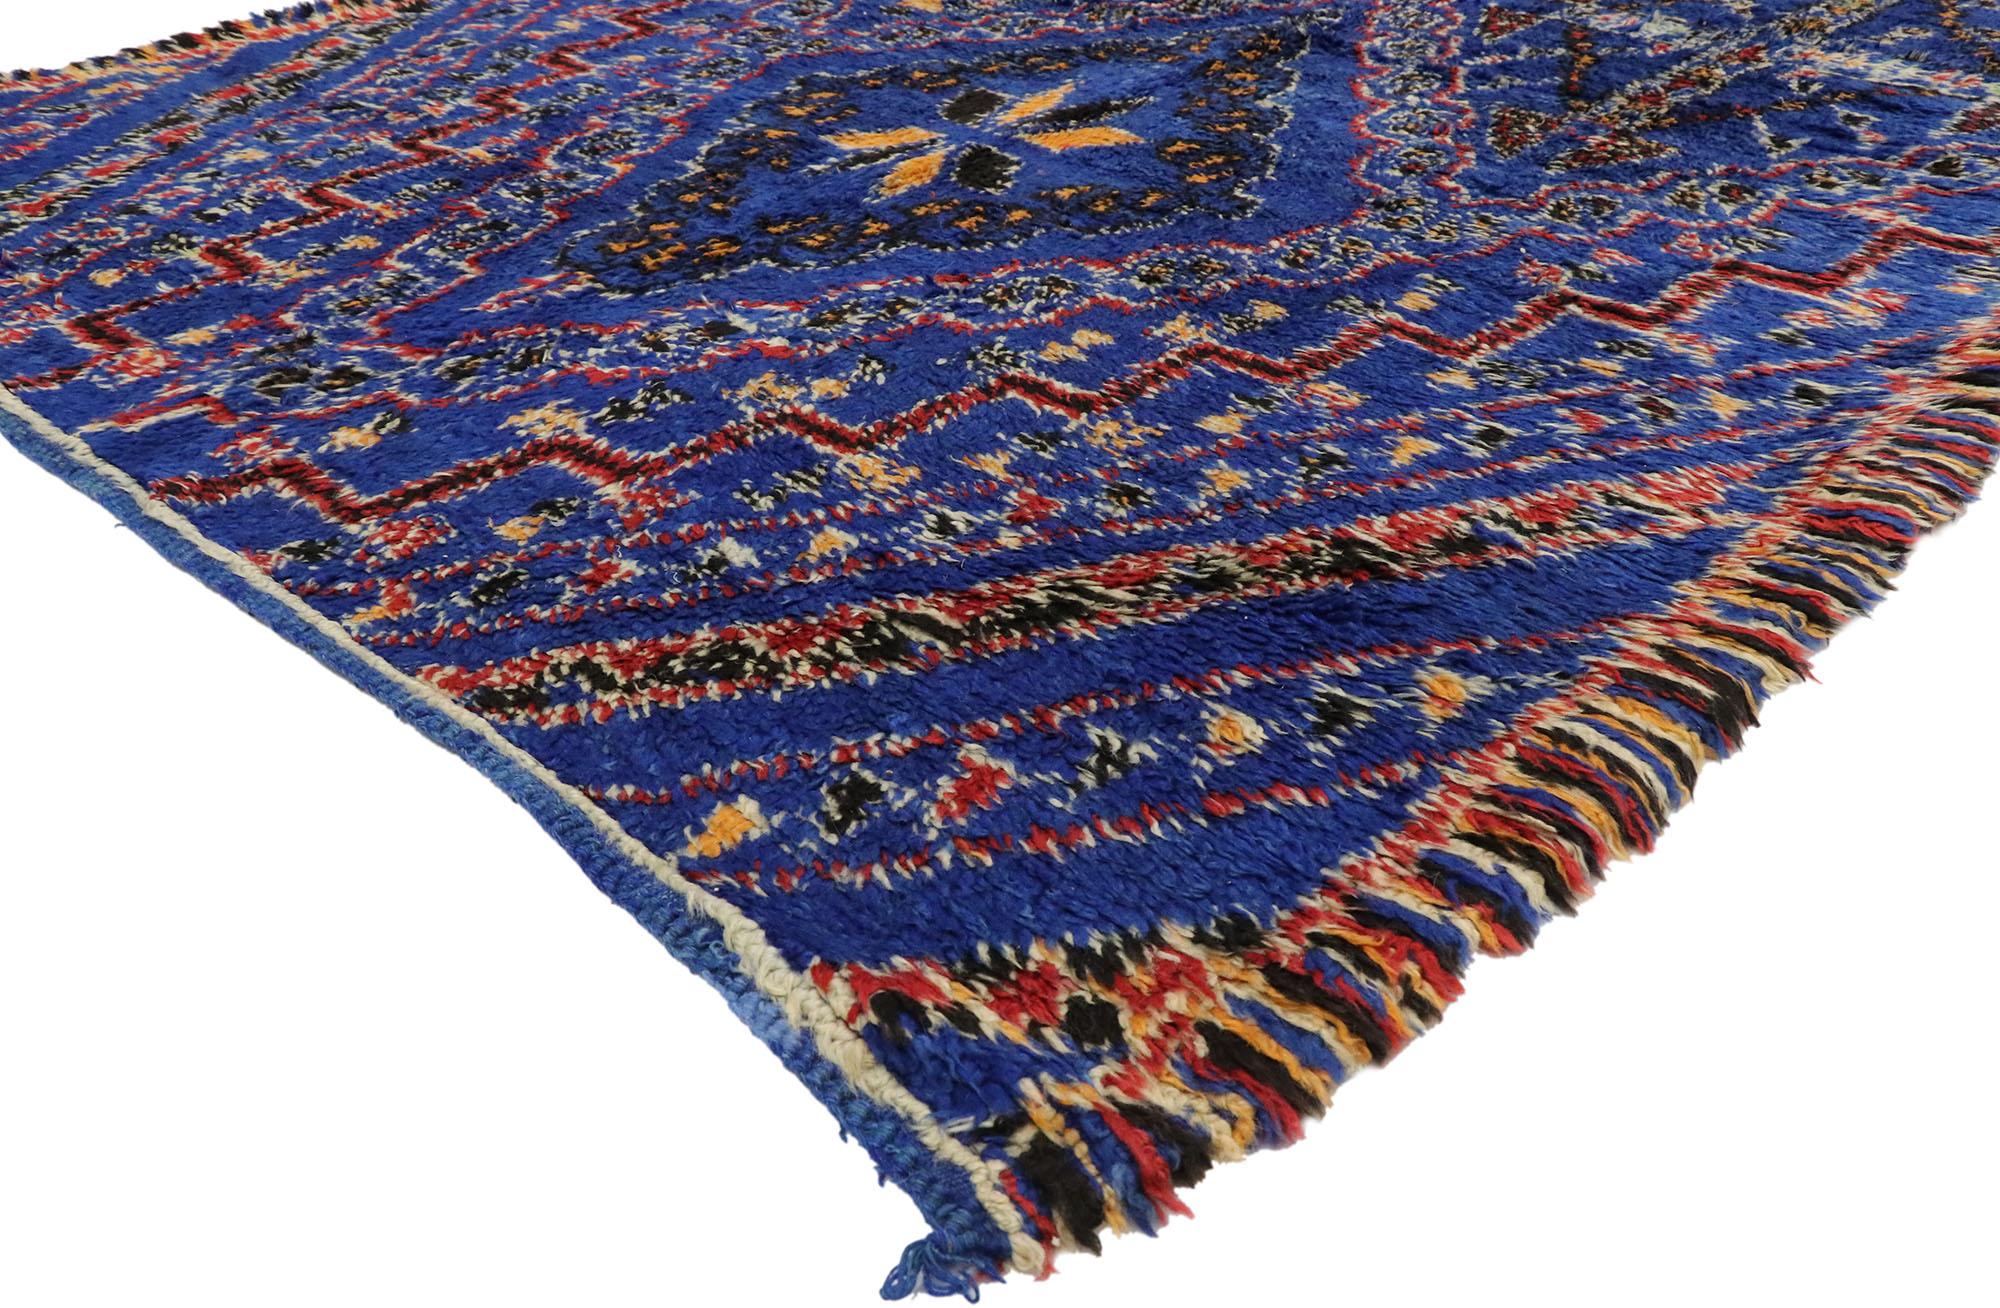 20123 vintage blue Beni Mguild Moroccan rug with Mid-Century Modern Tribal style. This hand knotted wool vintage blue Beni M'Guild Moroccan rug features a lozenge trellis composed of concentric diamonds, cross motifs, eight-point stars, smaller